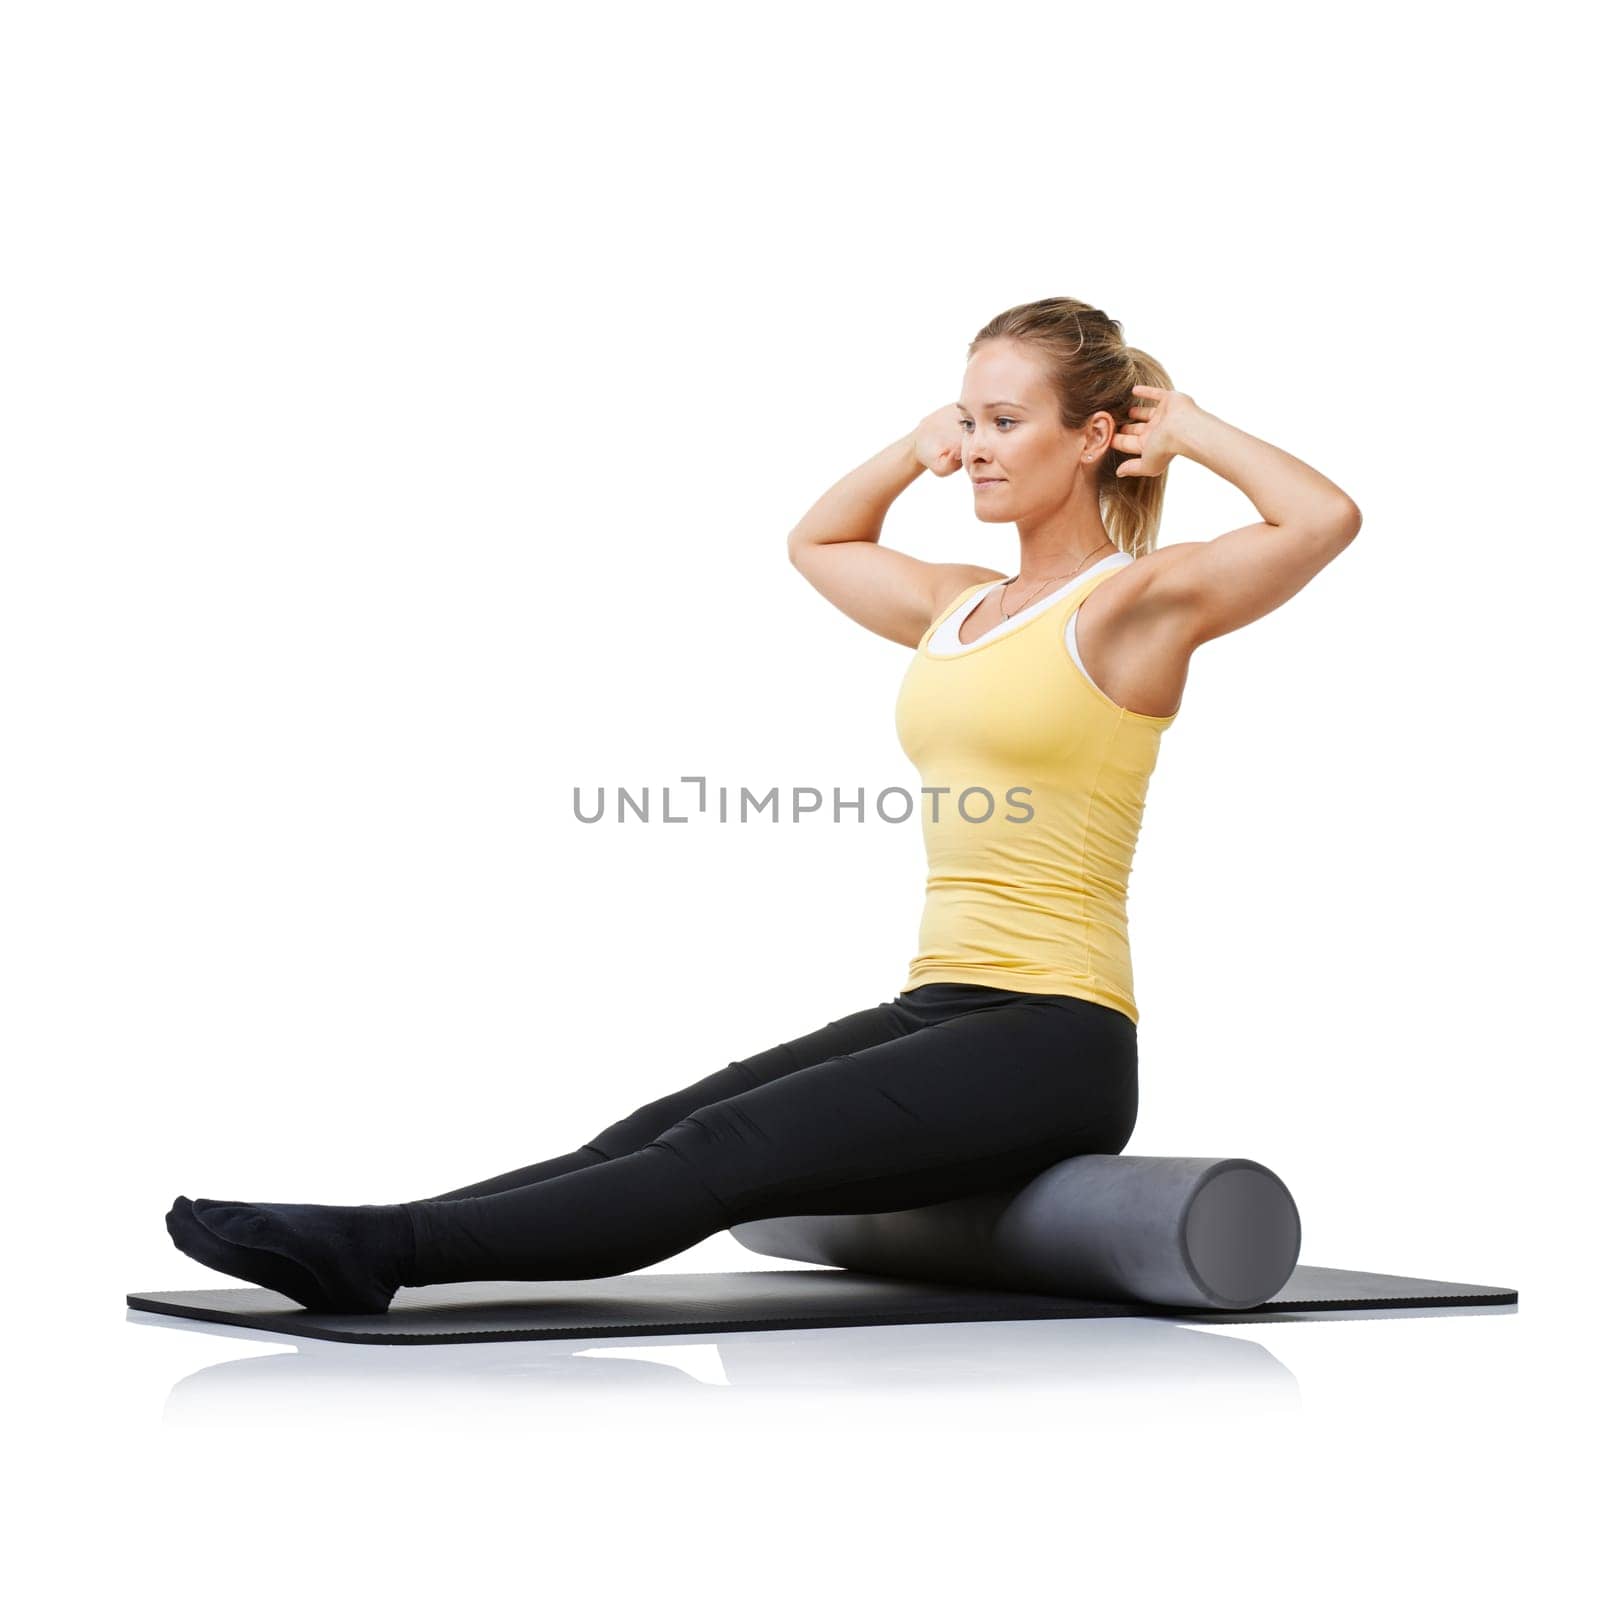 Studio workout, foam roller and pilates woman with posture training, core wellness challenge or stretching exercise for recovery. Ground, yoga mat and athlete physical activity on white background by YuriArcurs